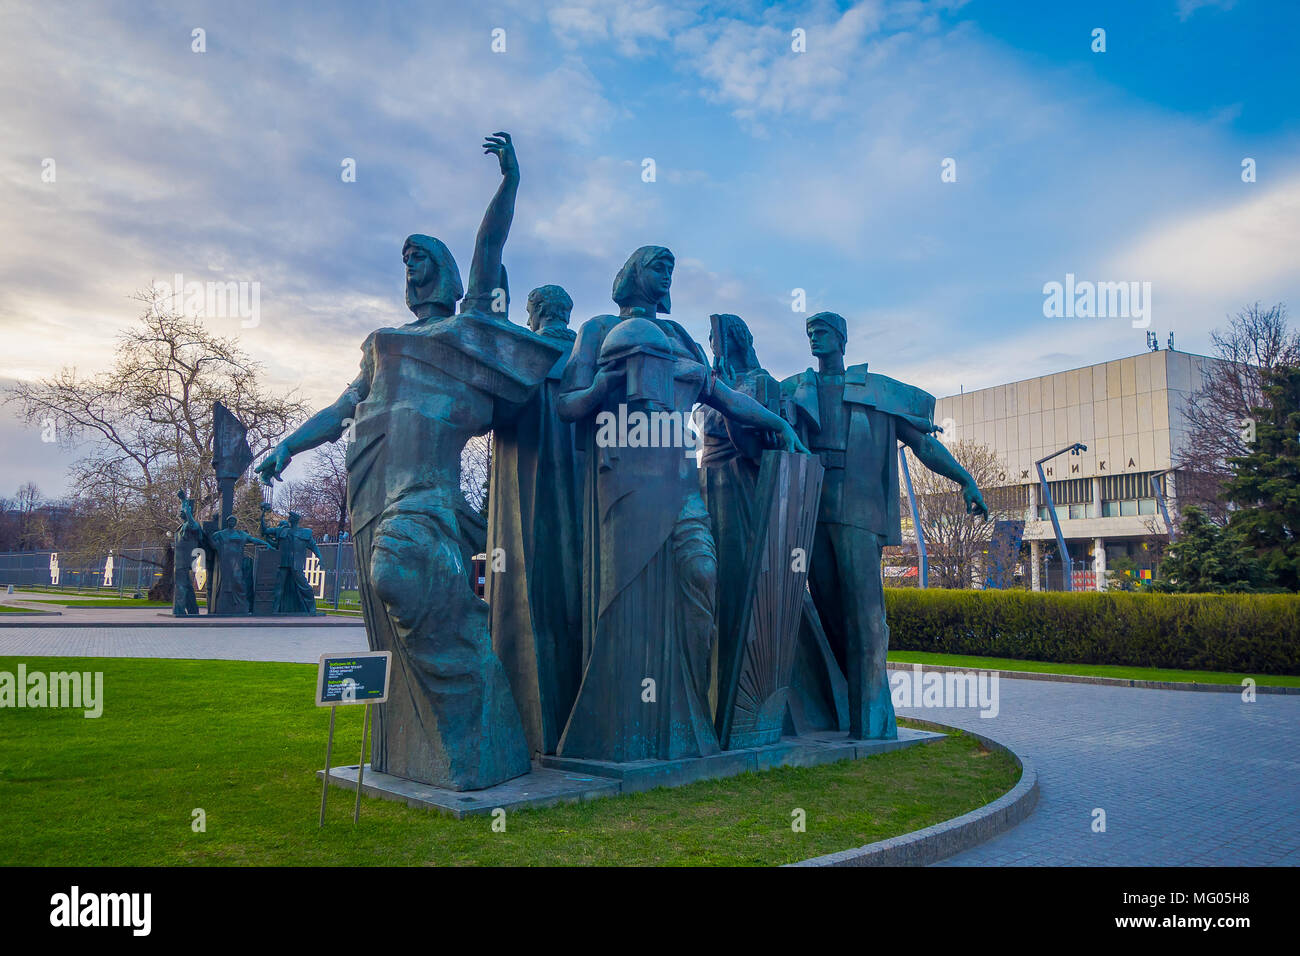 MOSCOW, RUSSIA - AUGUST 02, 2008: Outdoor view of old bronze sculptures o in Muzeon Art Park Fallen Monument Park Stock Photo